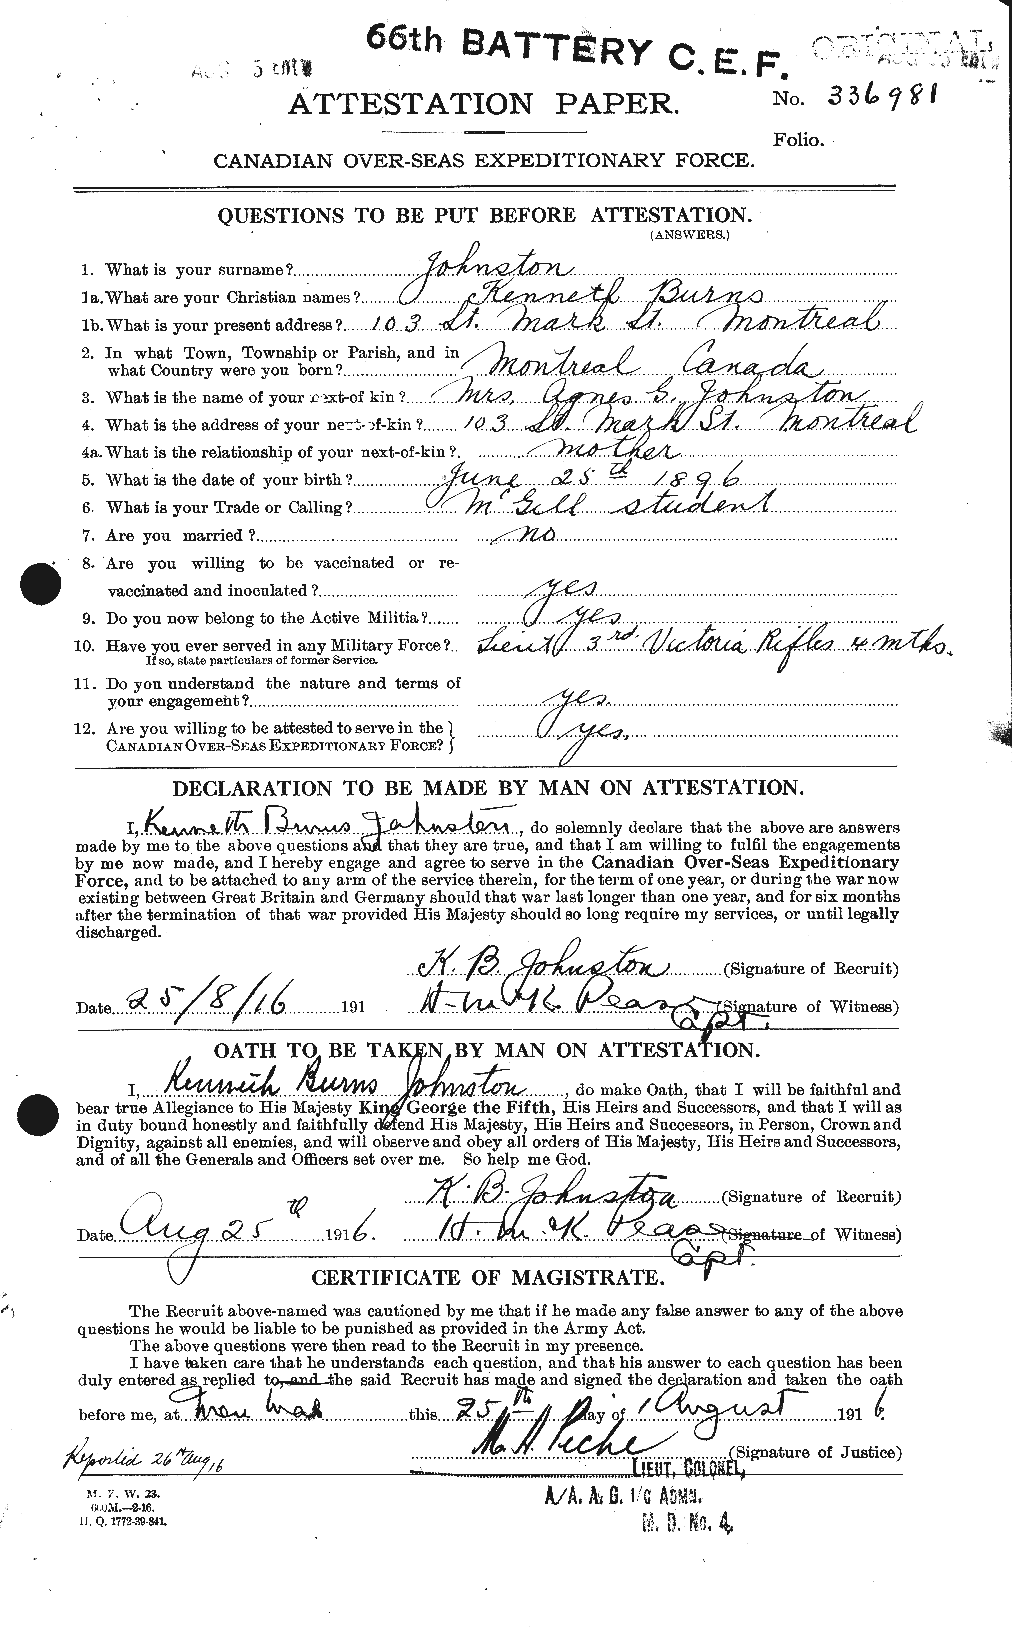 Personnel Records of the First World War - CEF 422928a